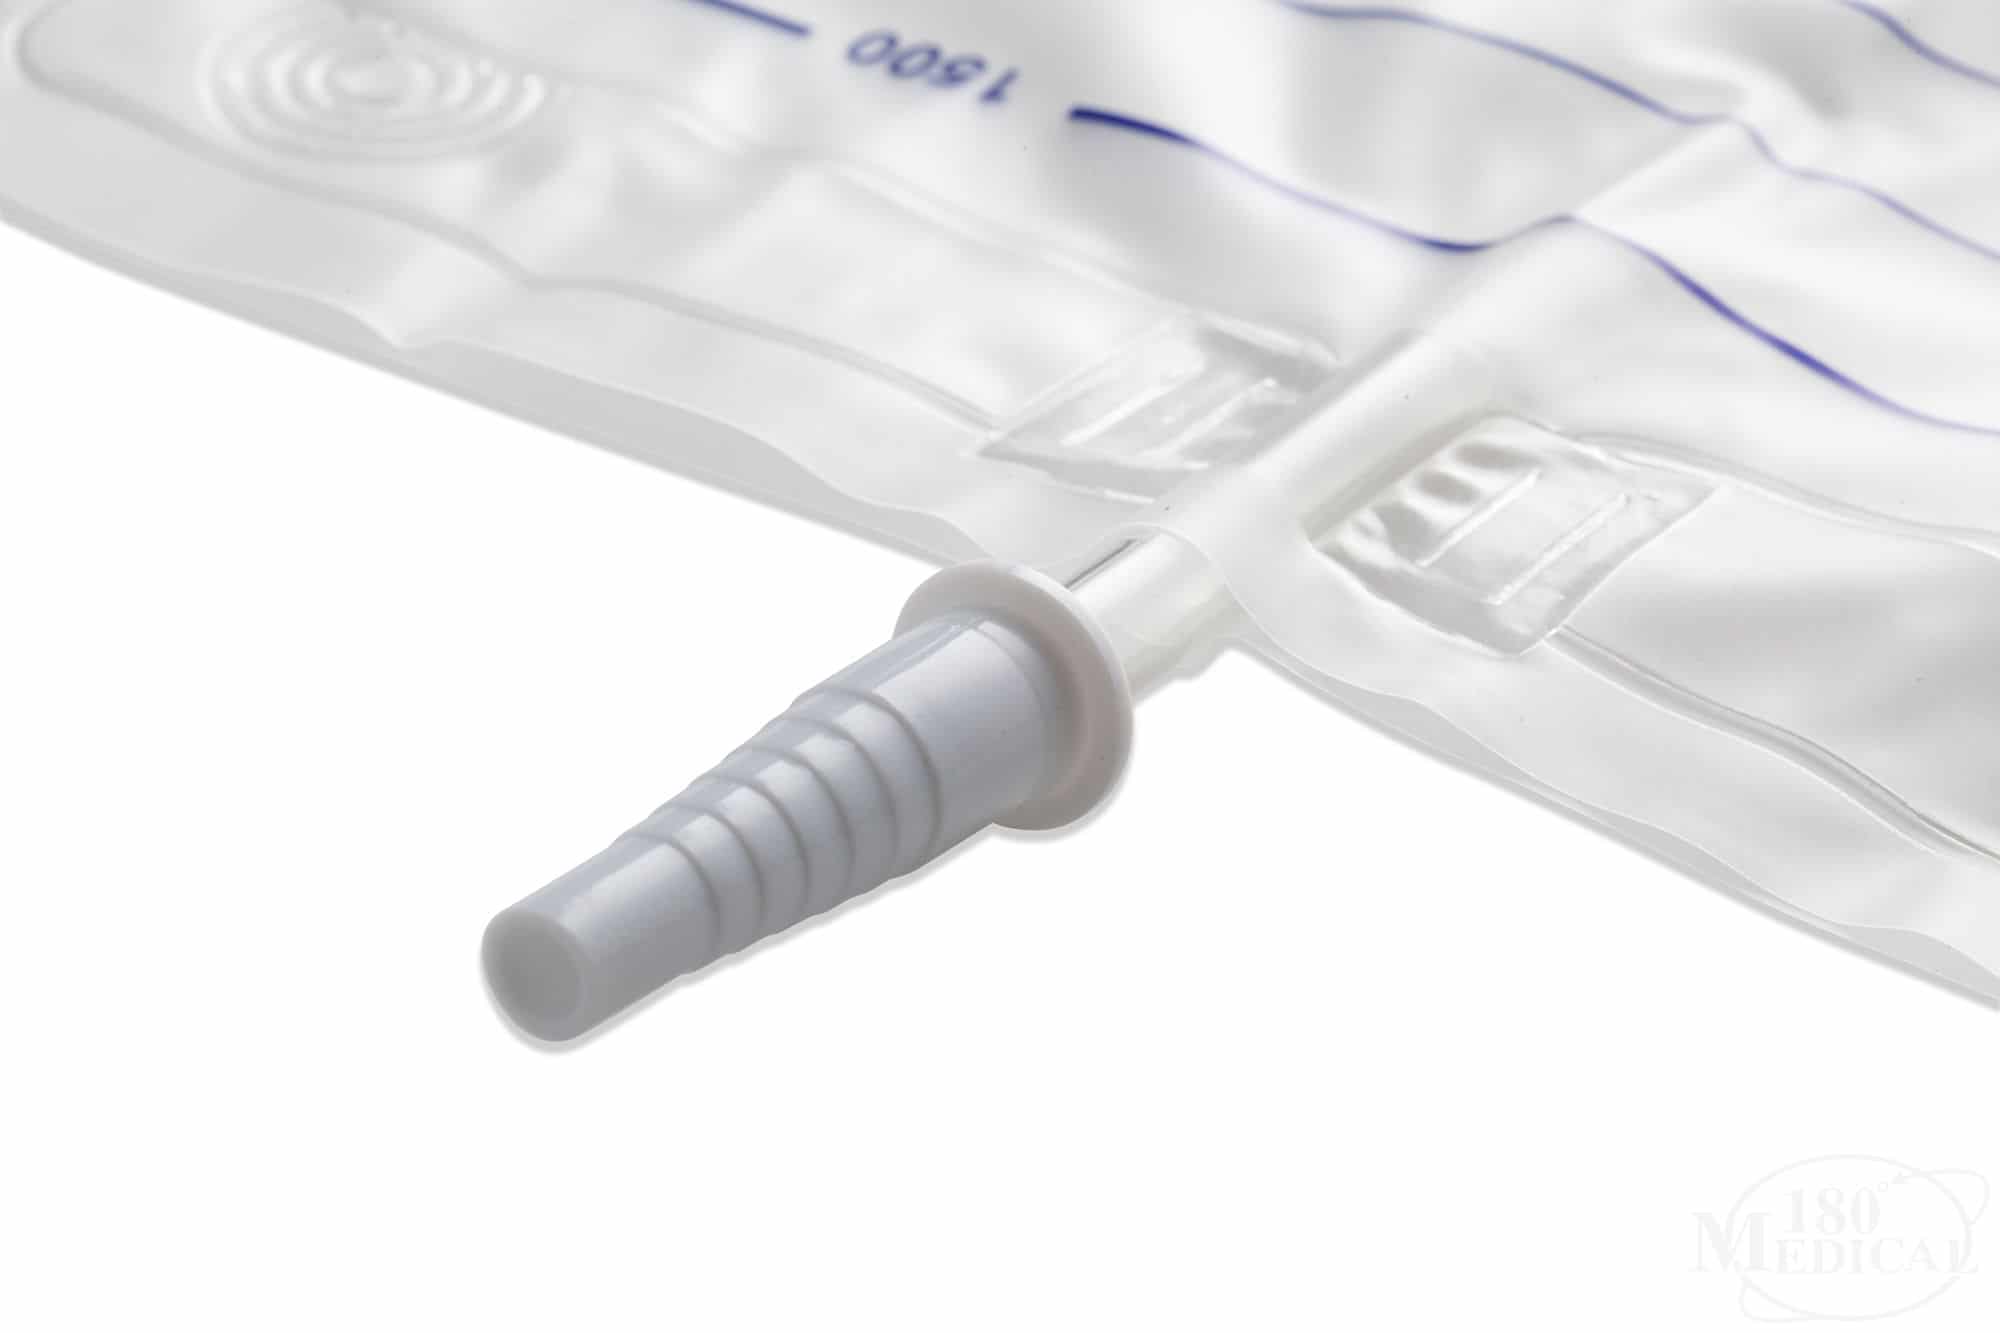 Cure Catheter Insertion Supplies Kits | 180 Medical